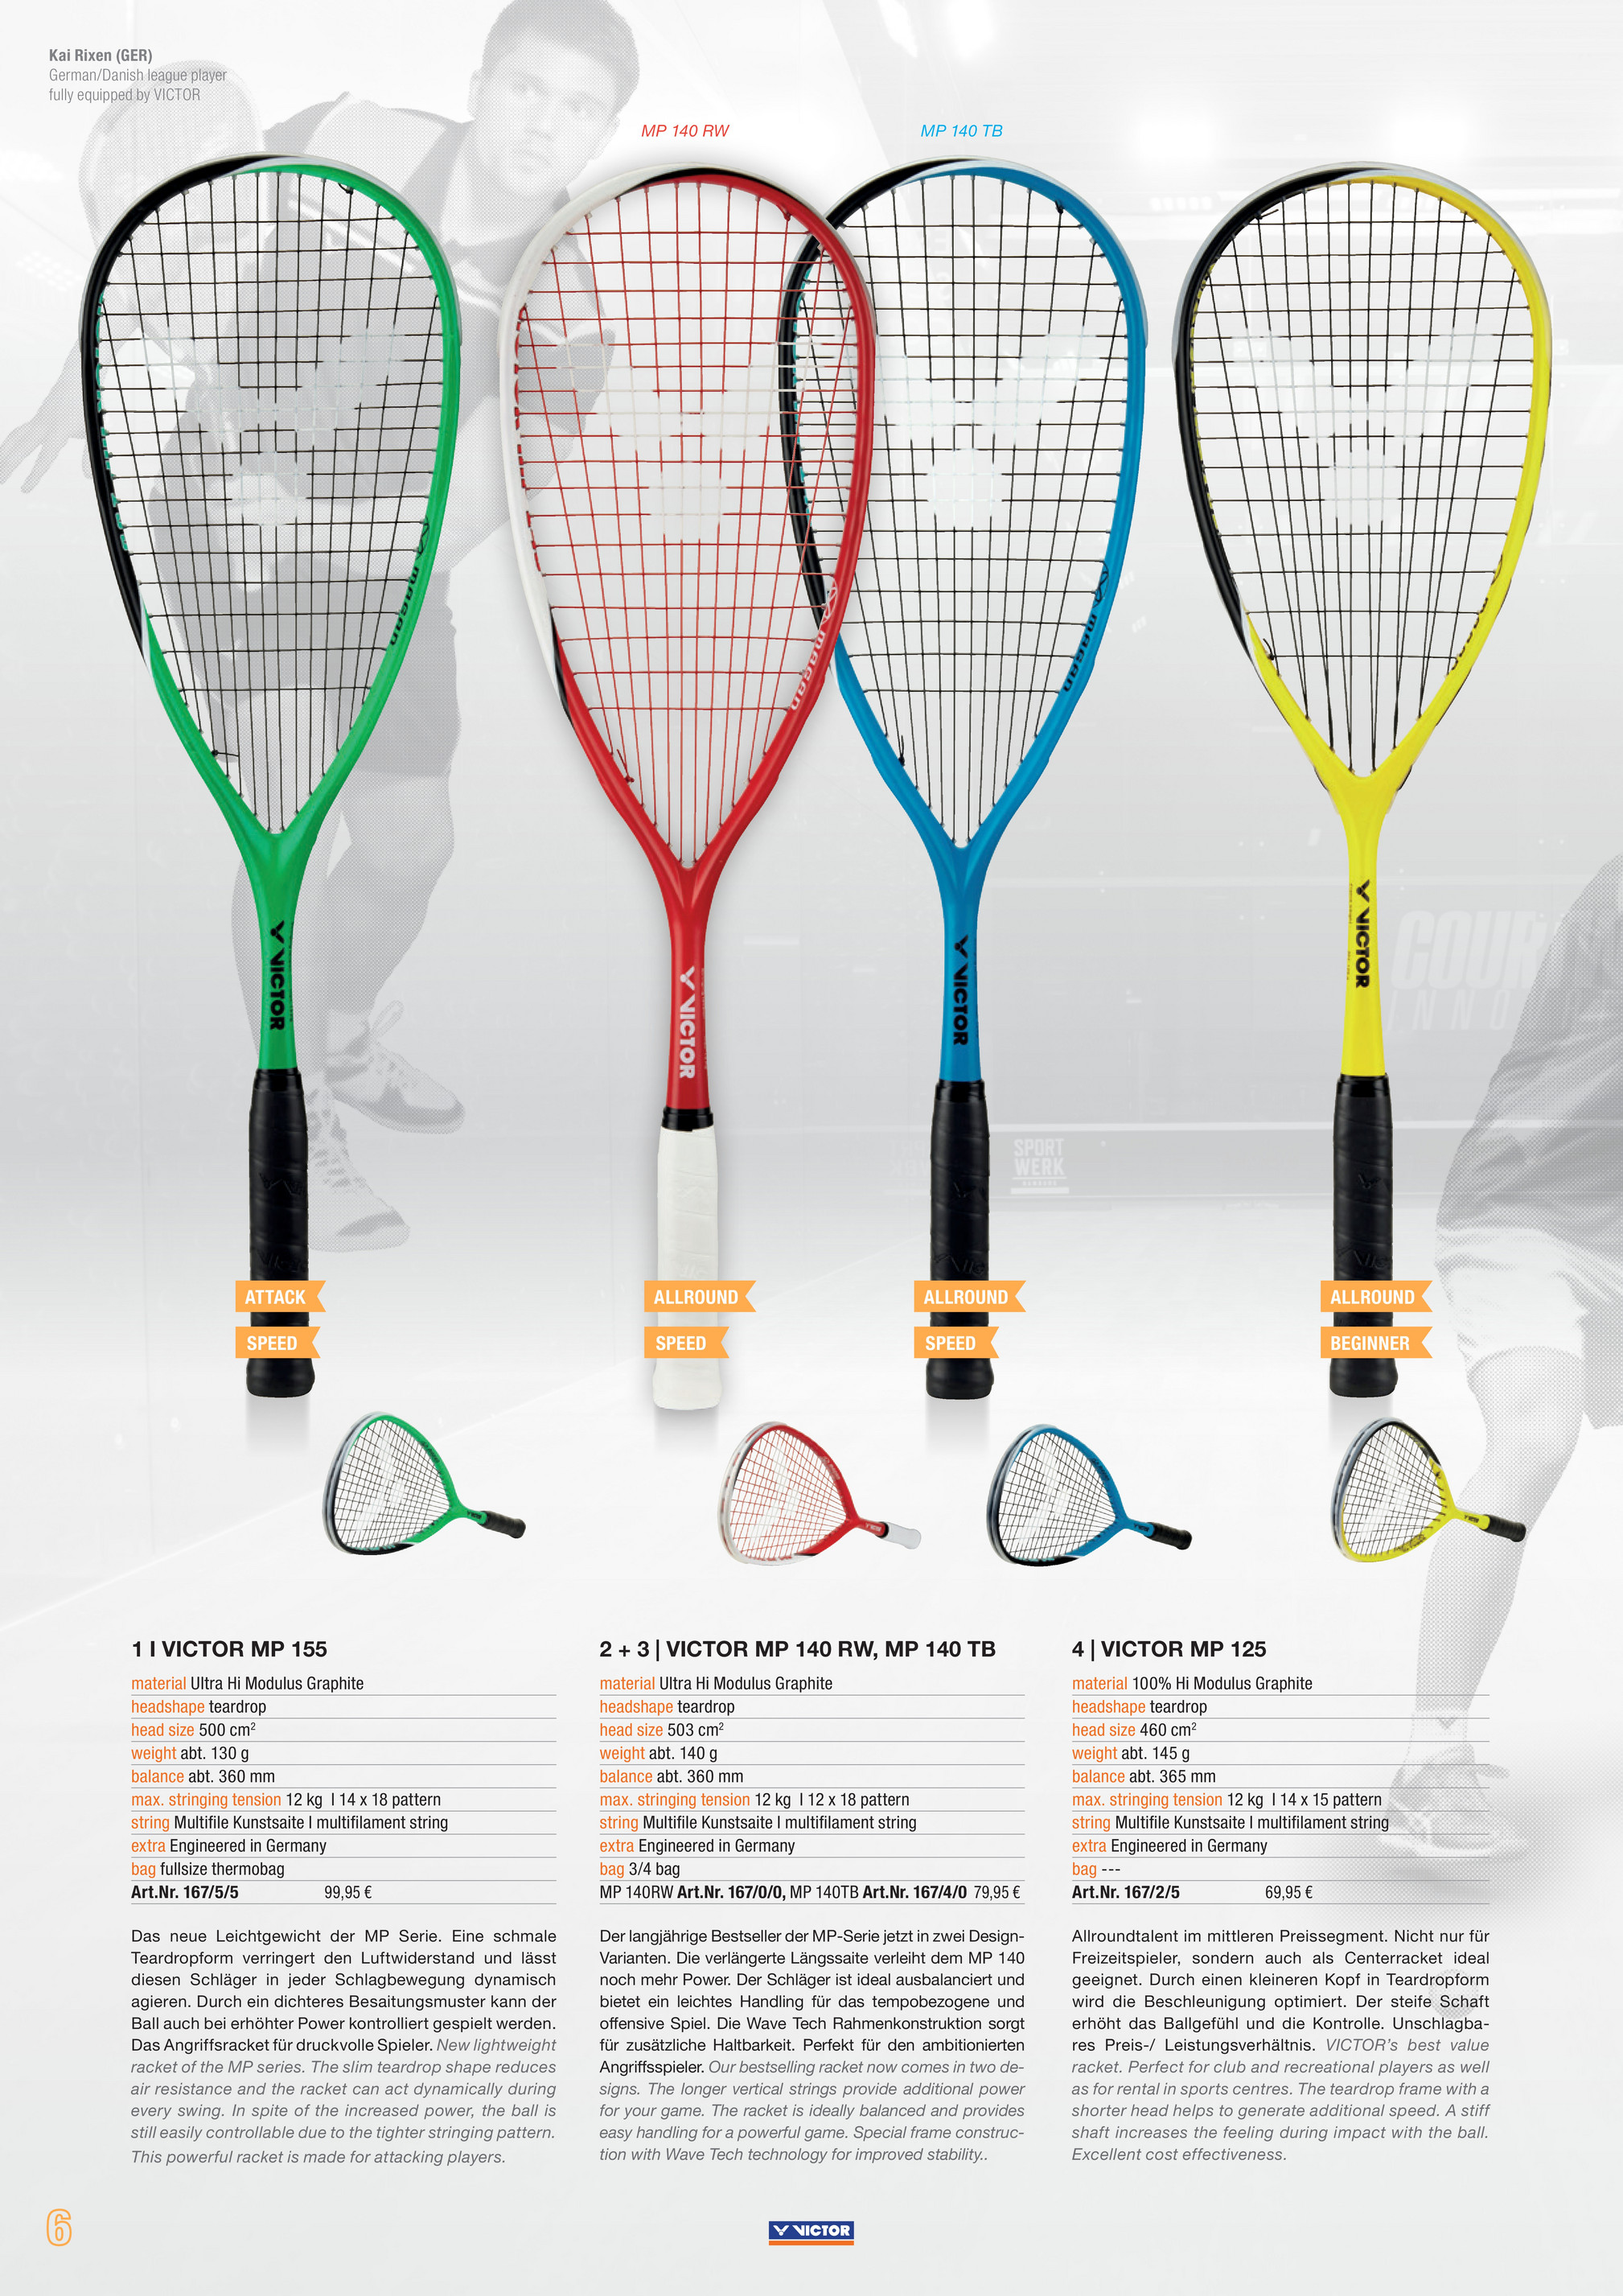 Executie parachute Herdenkings VICTOR Sport s.r.o. - VICTOR Squash katalog 2017 - Stana 4-5 - Created with  Publitas.com